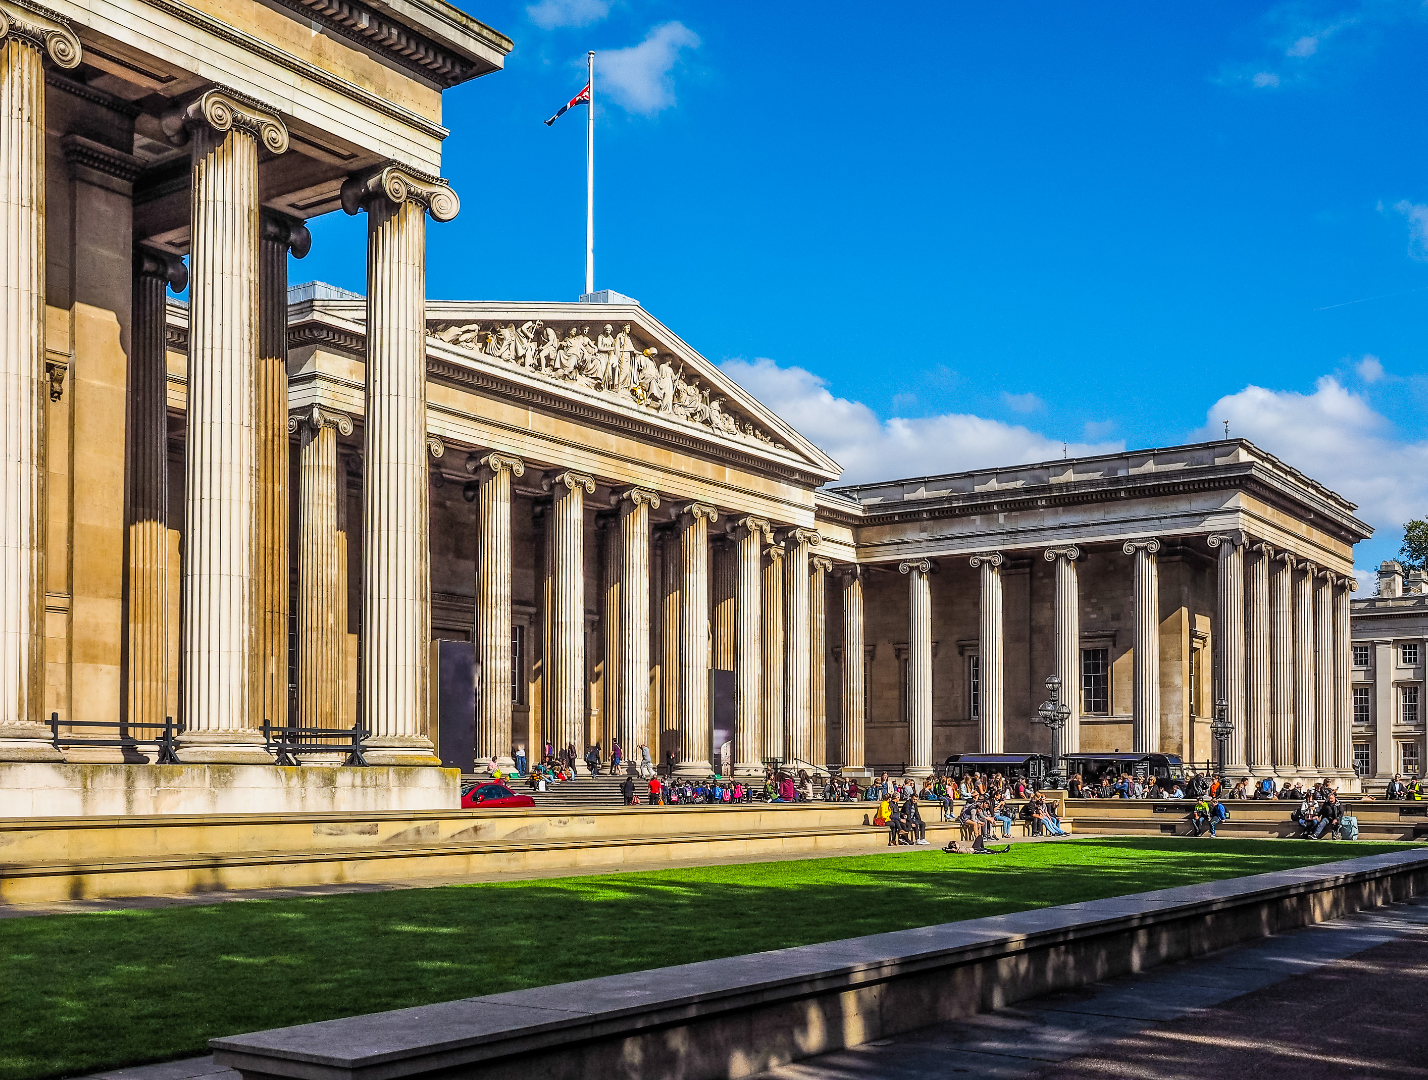 British Museum should see in London in 2 days